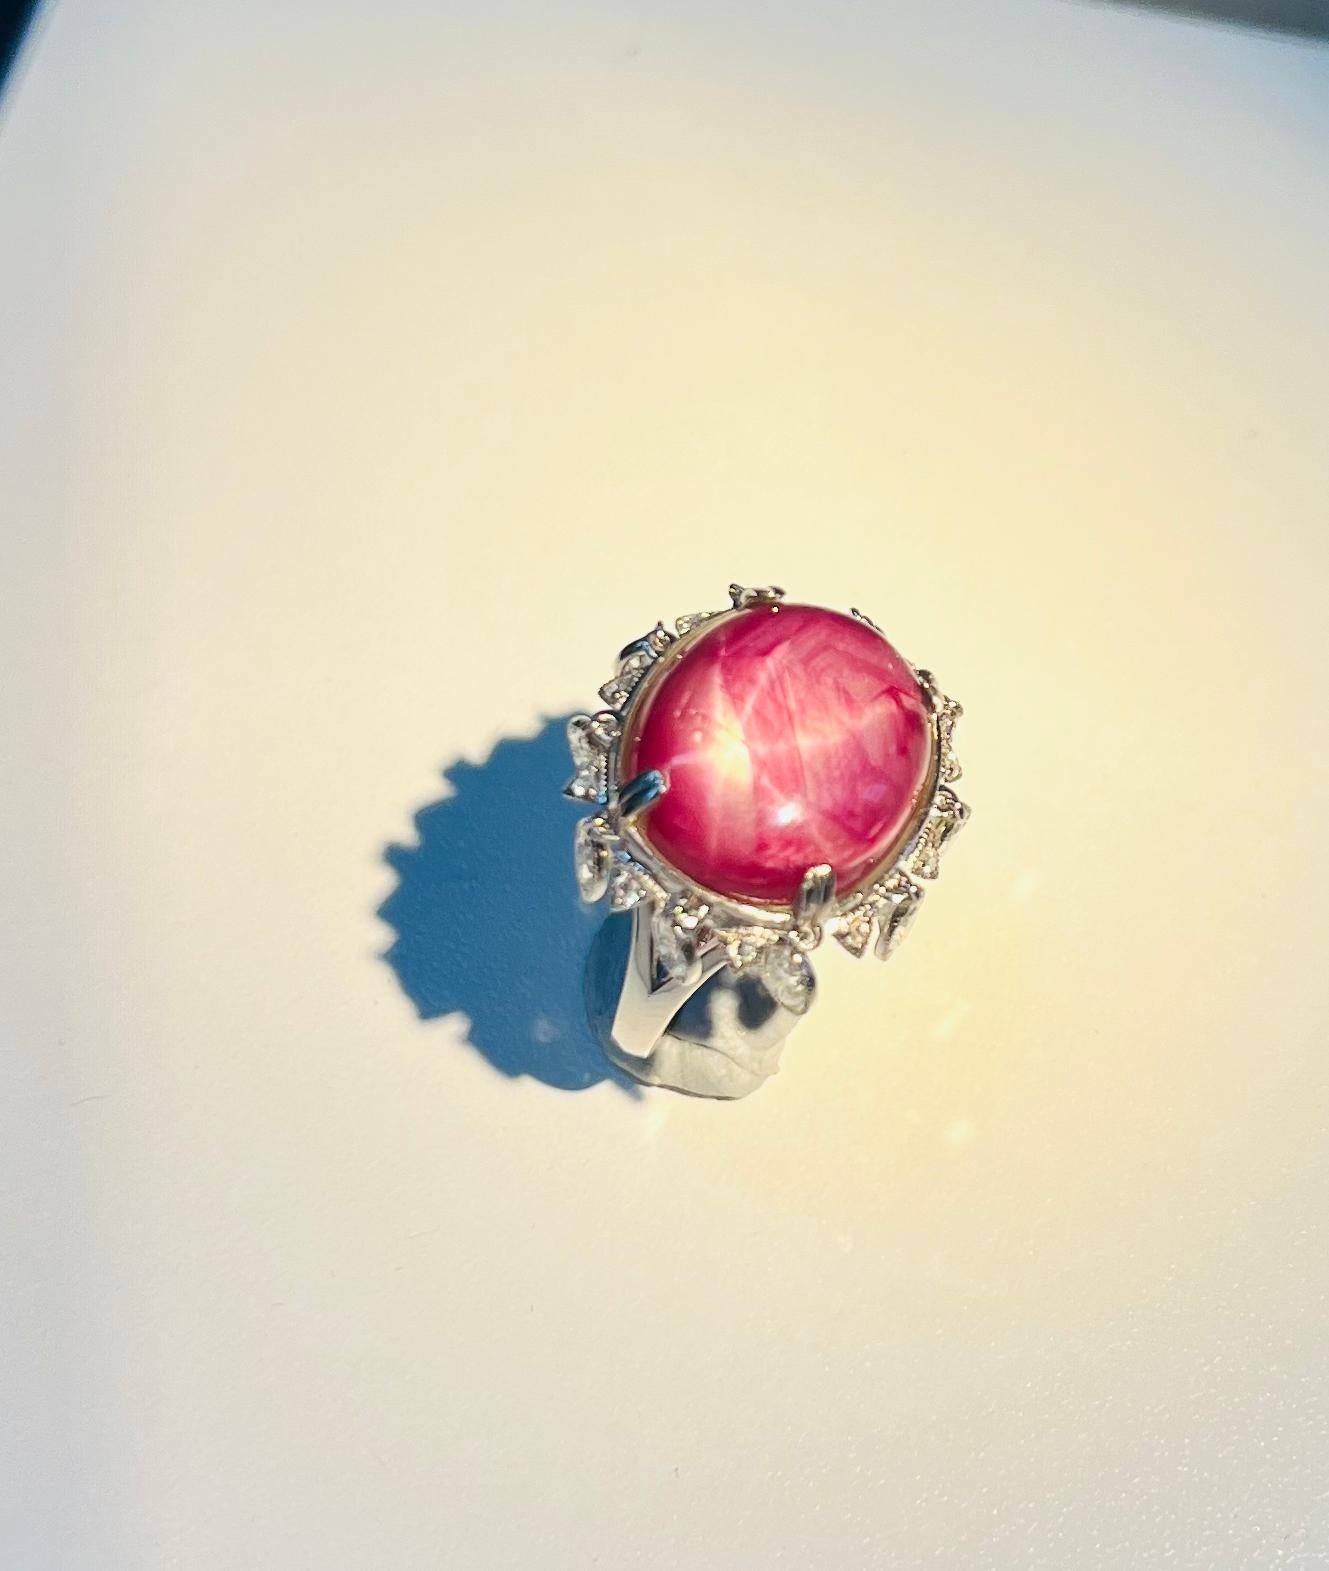 Cabochon Extremely Rare Natural Star Ruby 20.68 ct 18k 2.06 ct Diamond Art Deco Ring For Sale